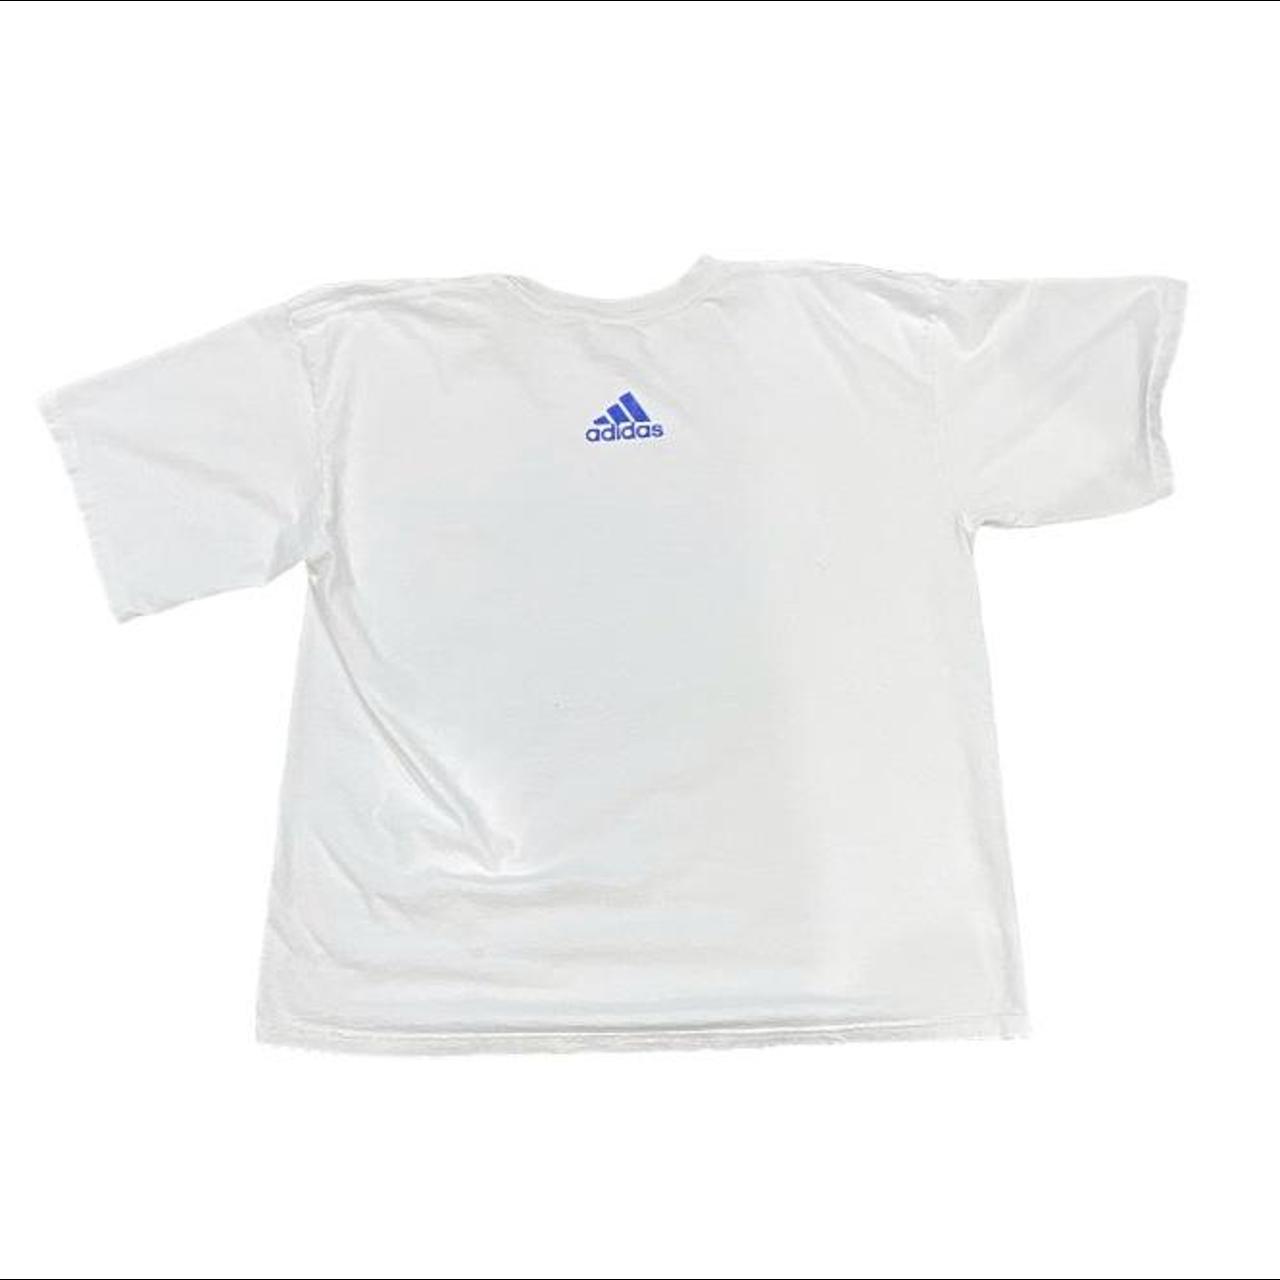 Adidas Men's Blue and White T-shirt (3)